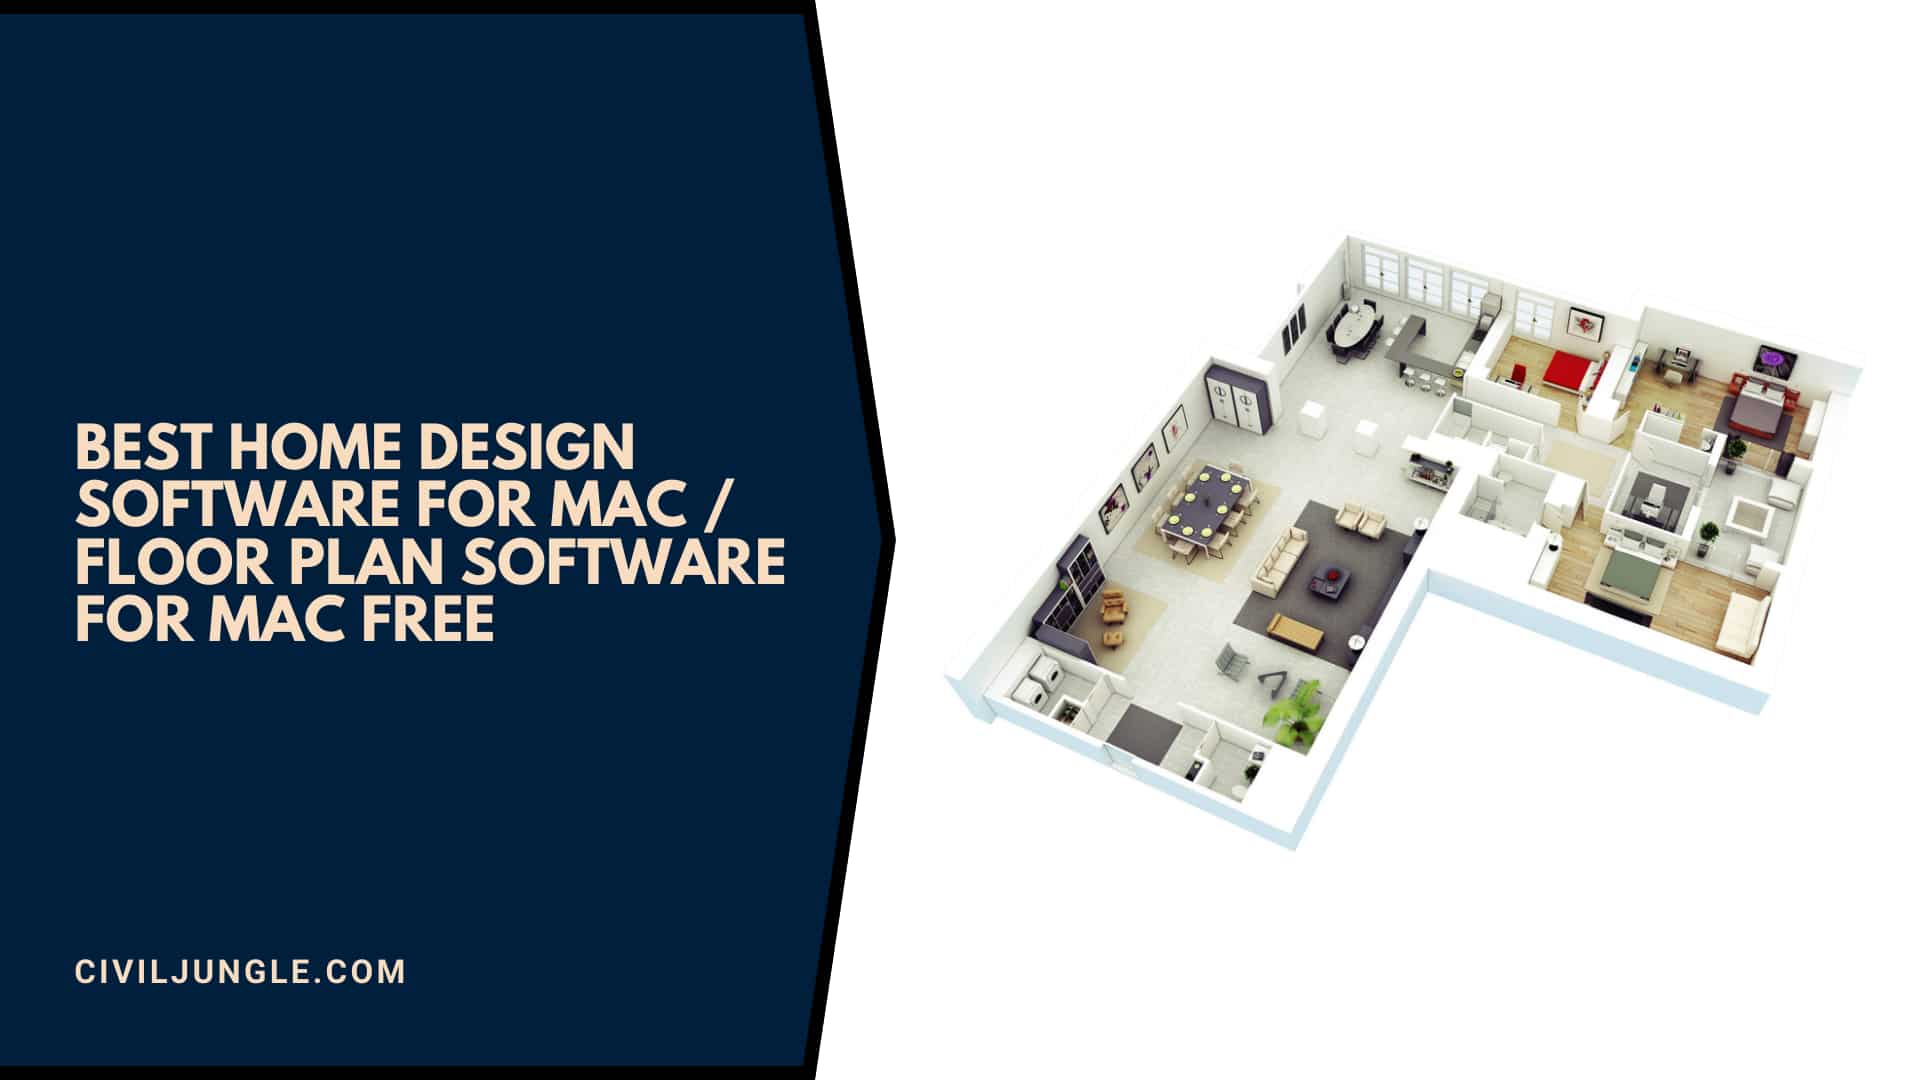 Difference Between 'Floor Plan Software and Home Design Software